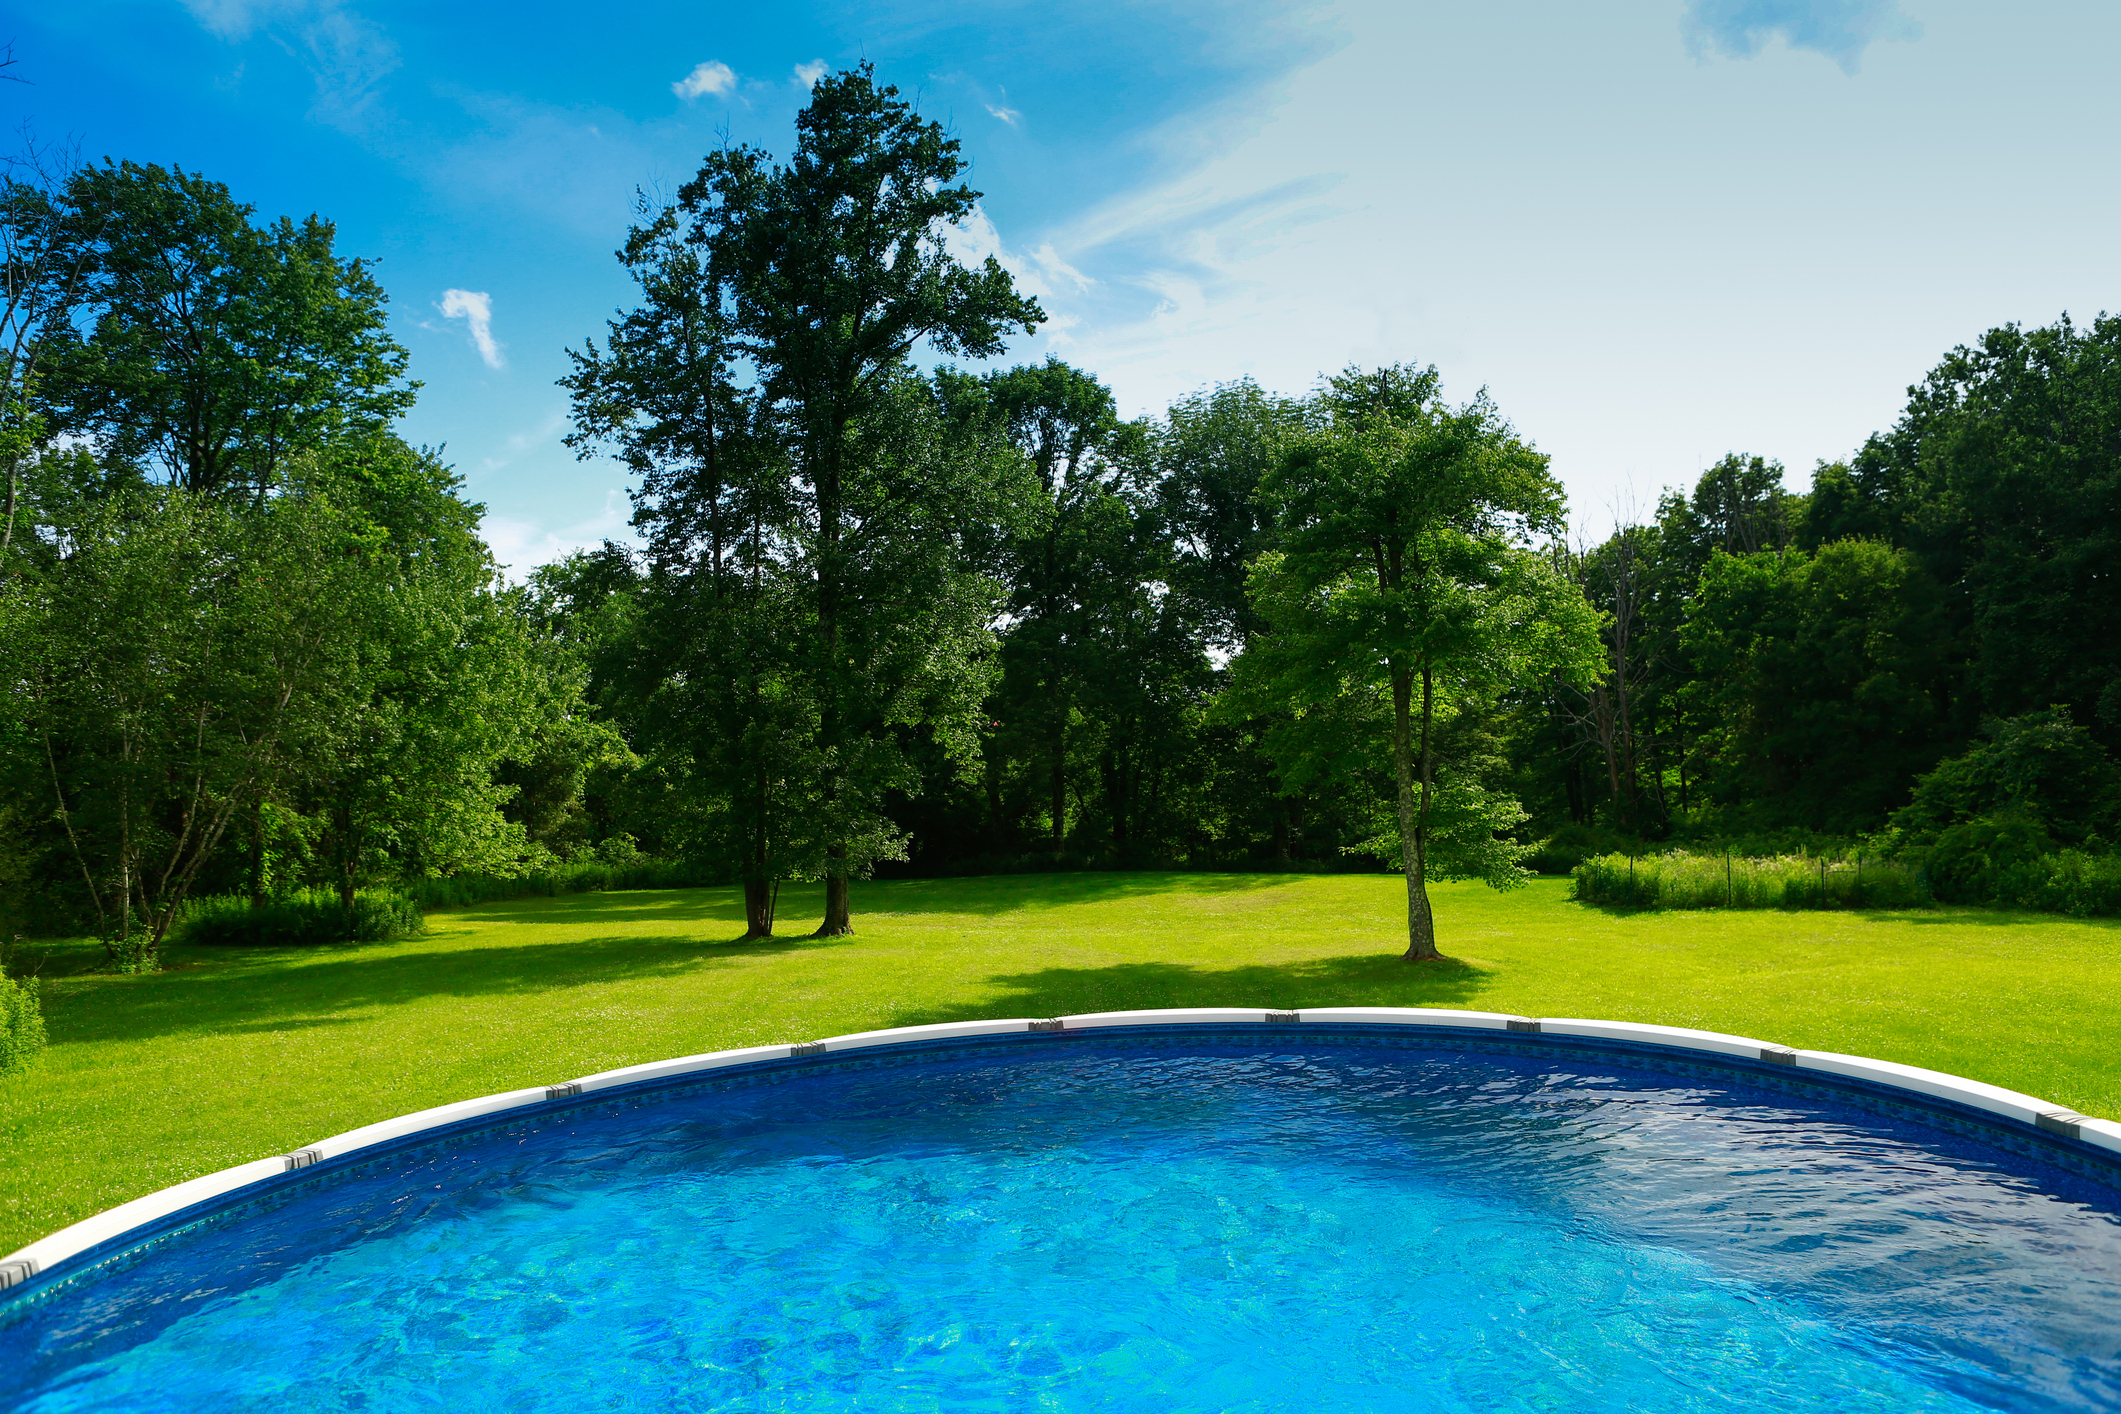 How Much Does An Above Ground Pool Cost, Above Ground Pool Costs York Park